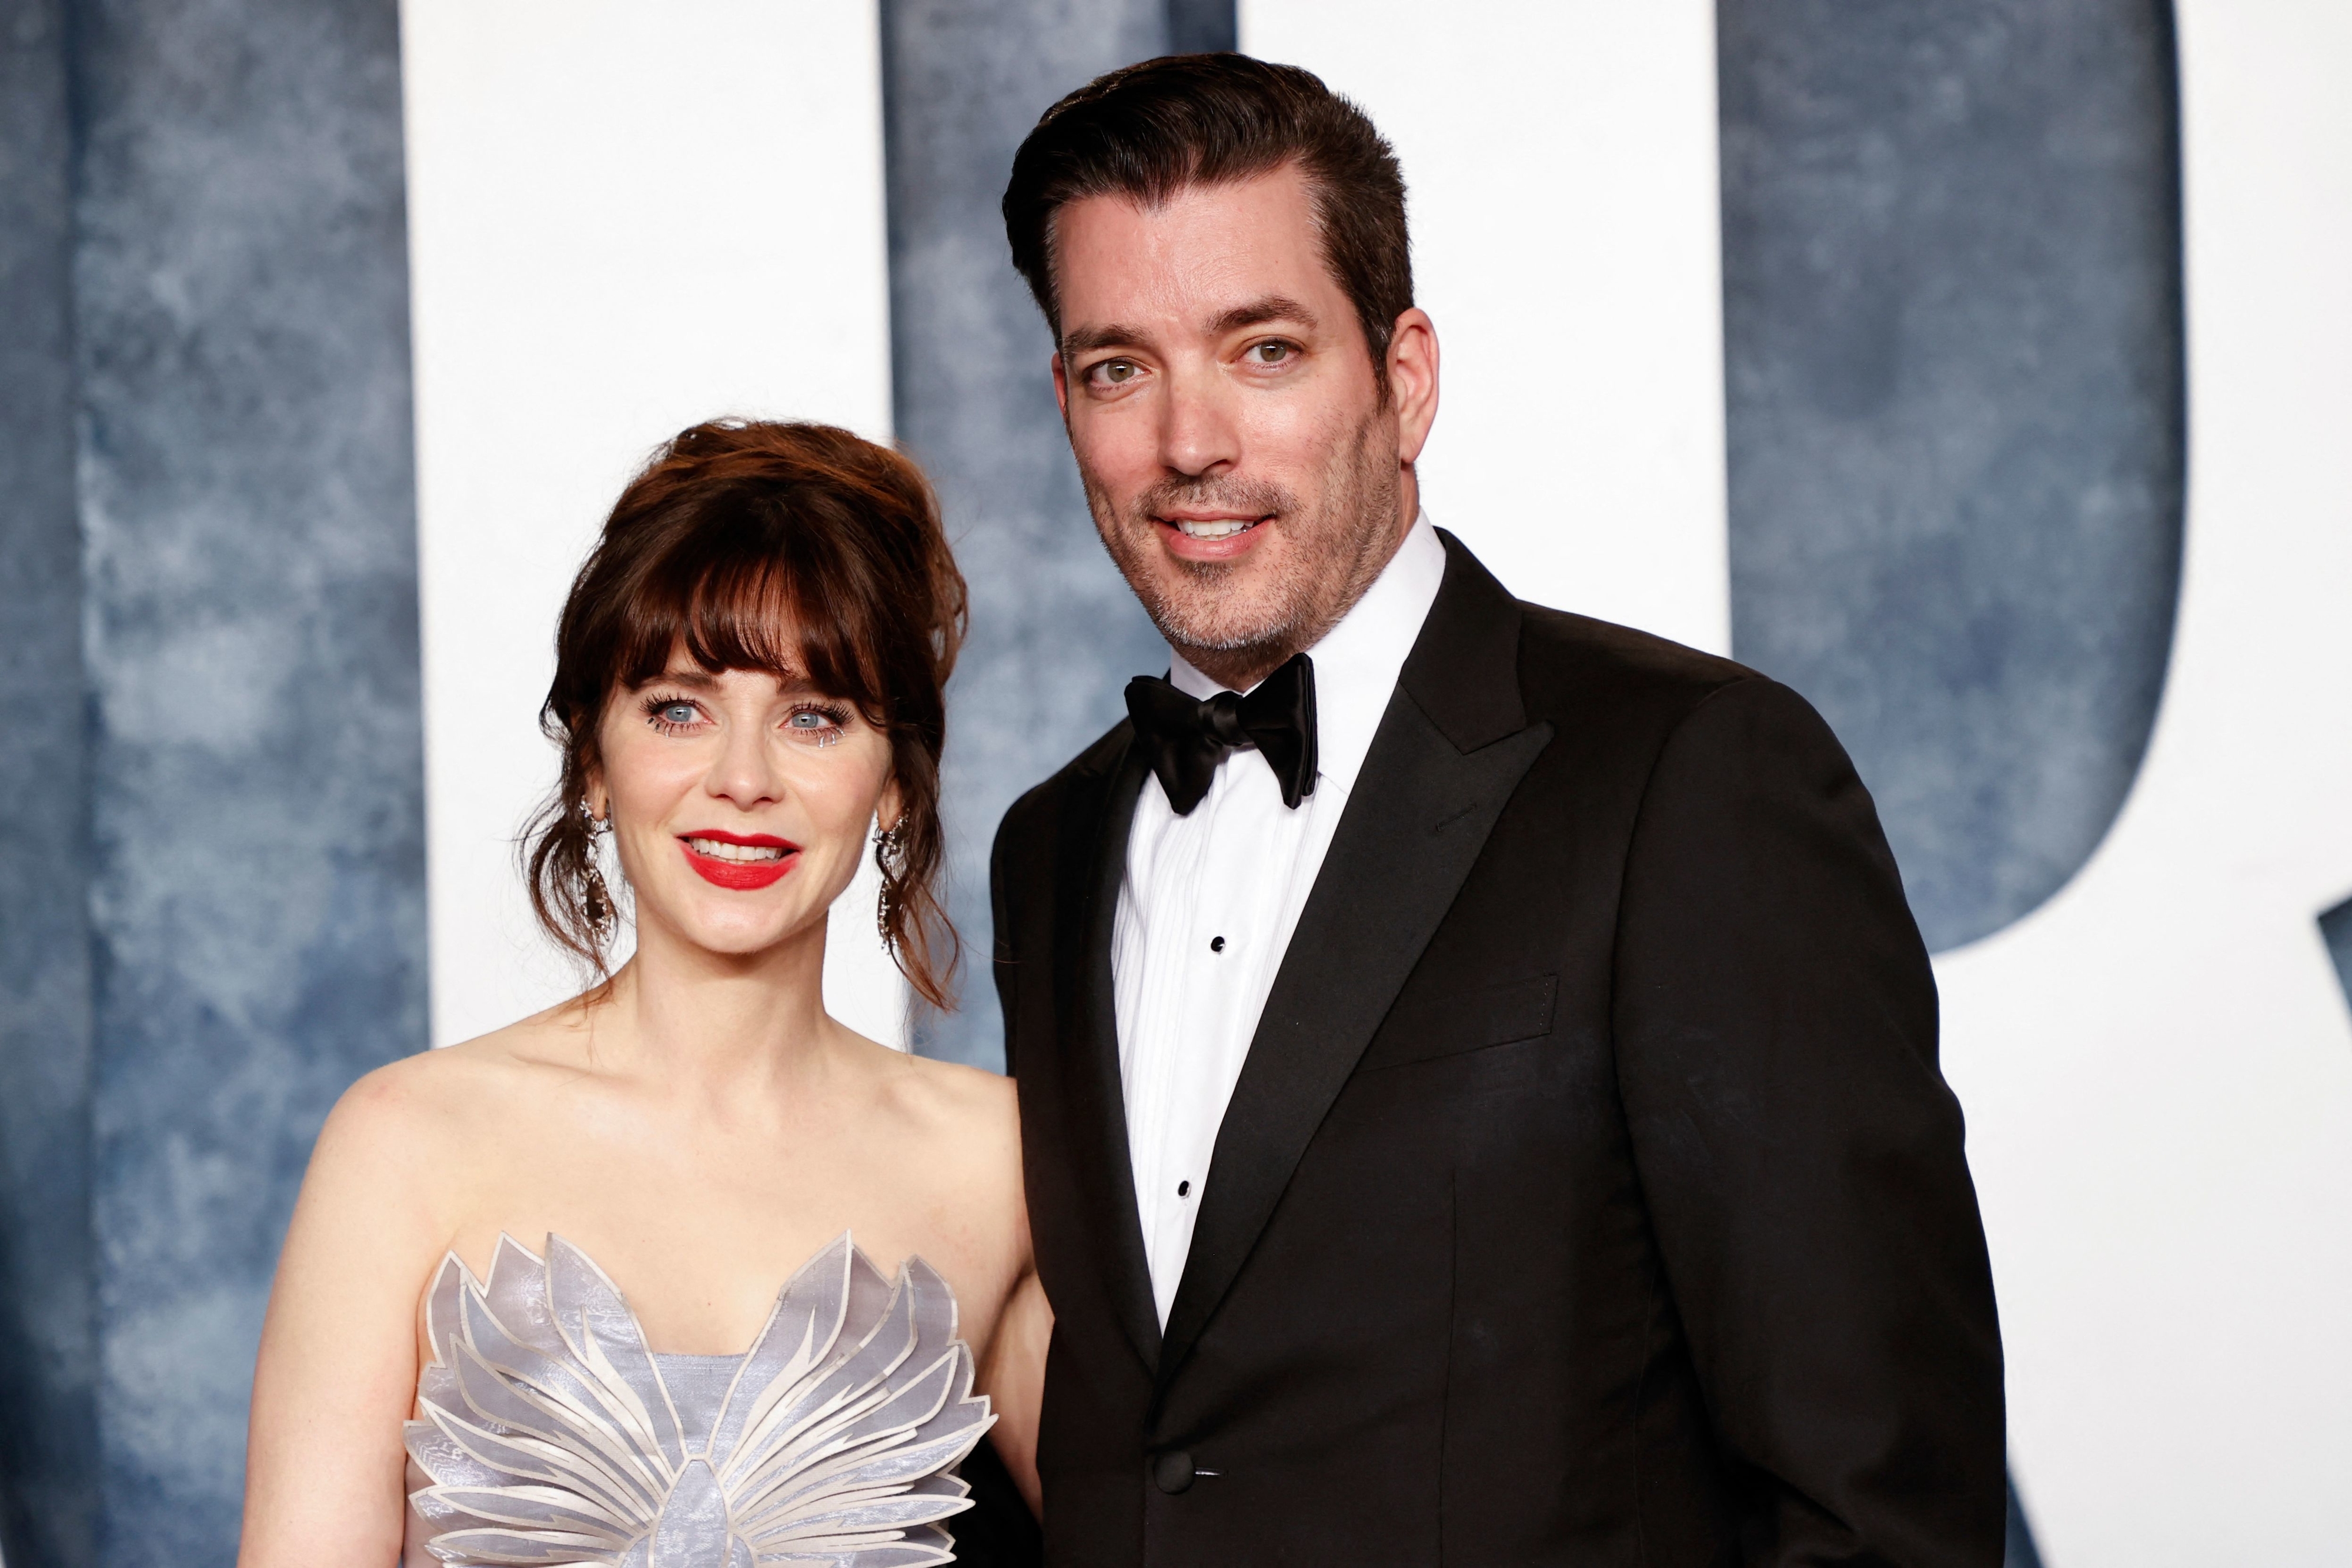 Closeup of Zooey Deschanel and Jonathan Scott at a formal event. Jonathan is in a tux and Zooey is wearing a strapless gown